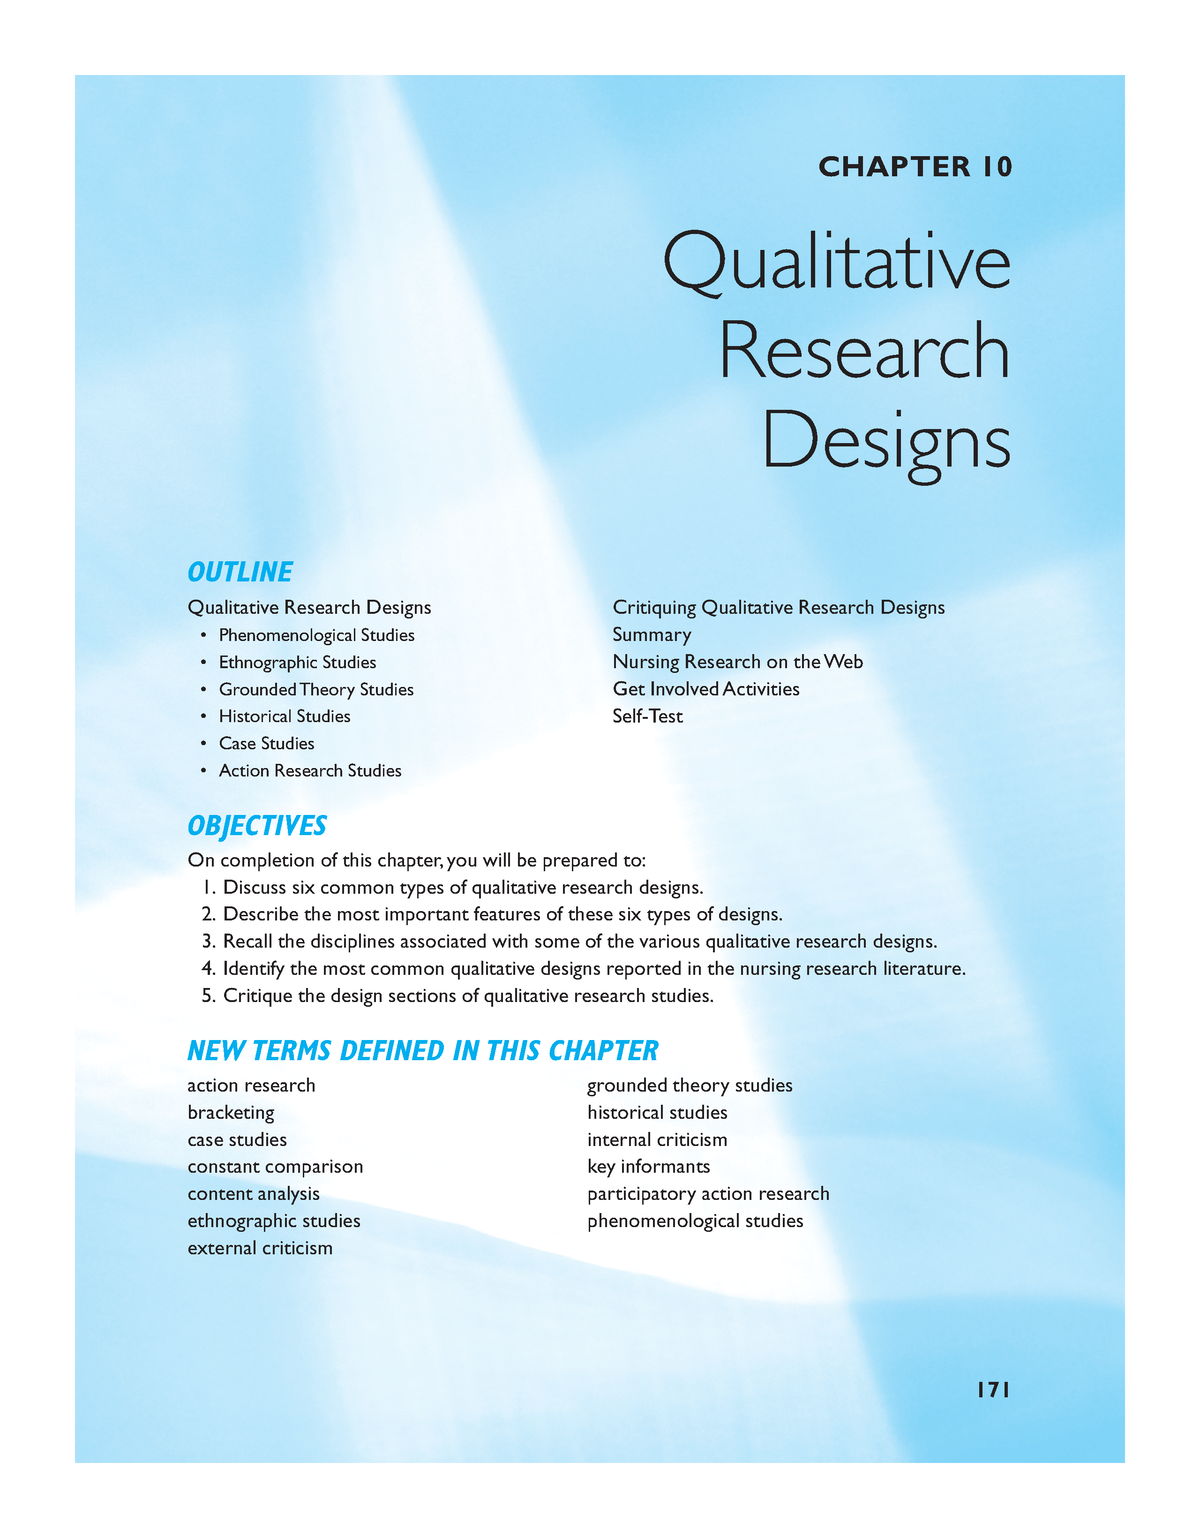 document analysis as a qualitative research method. qualitative research journal